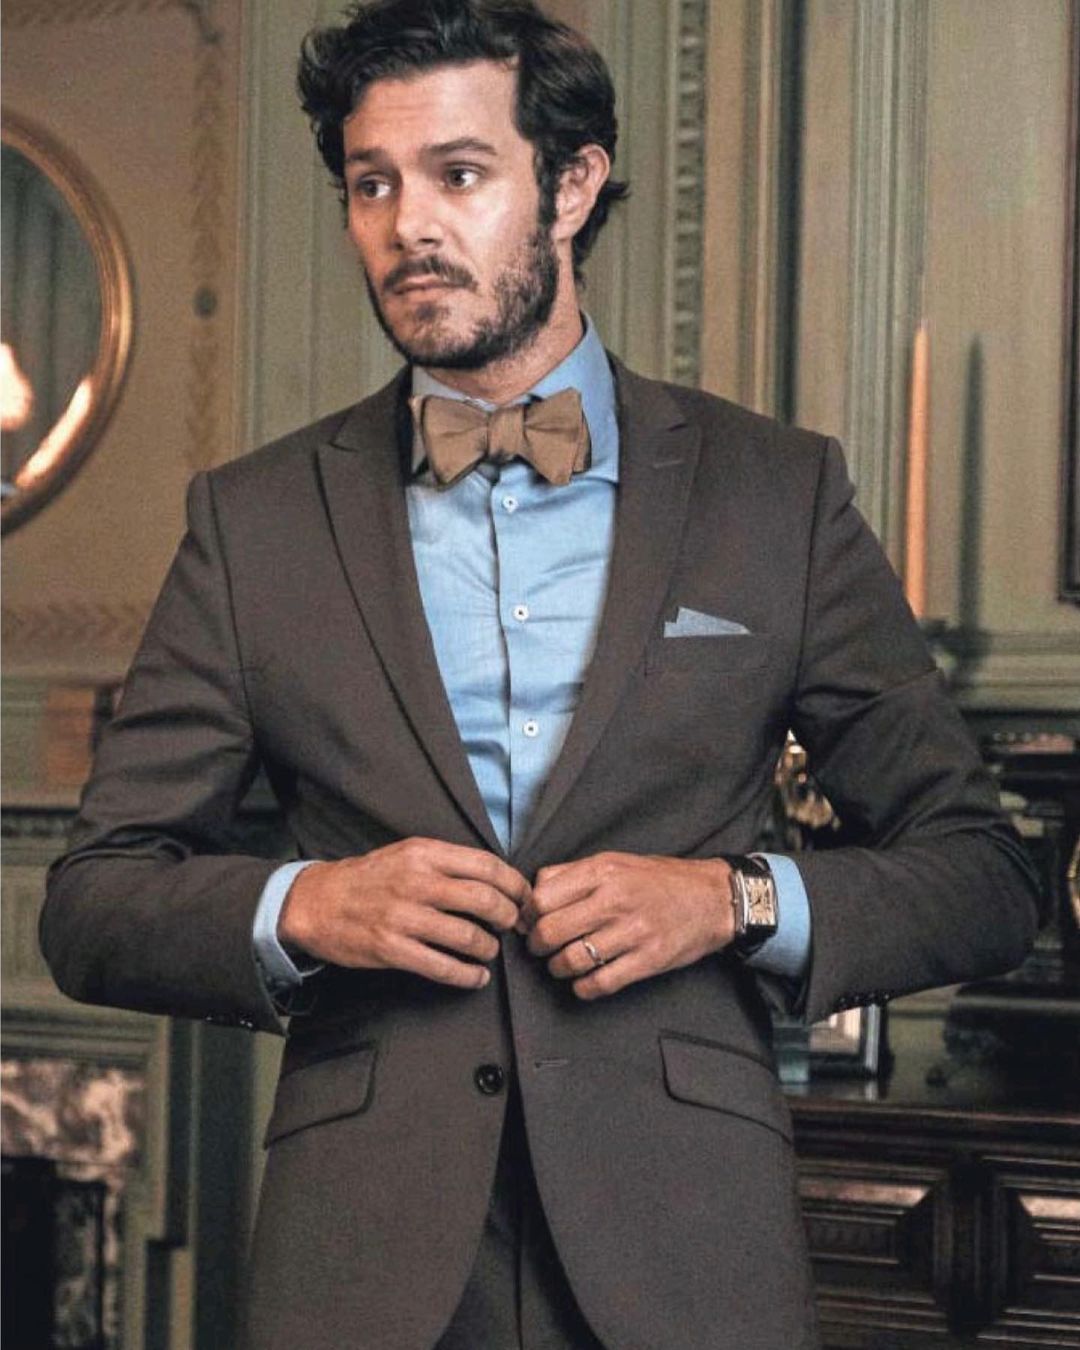 Adam Brody (American Actor) - Age, Wife, Net Worth, Movies, Startup